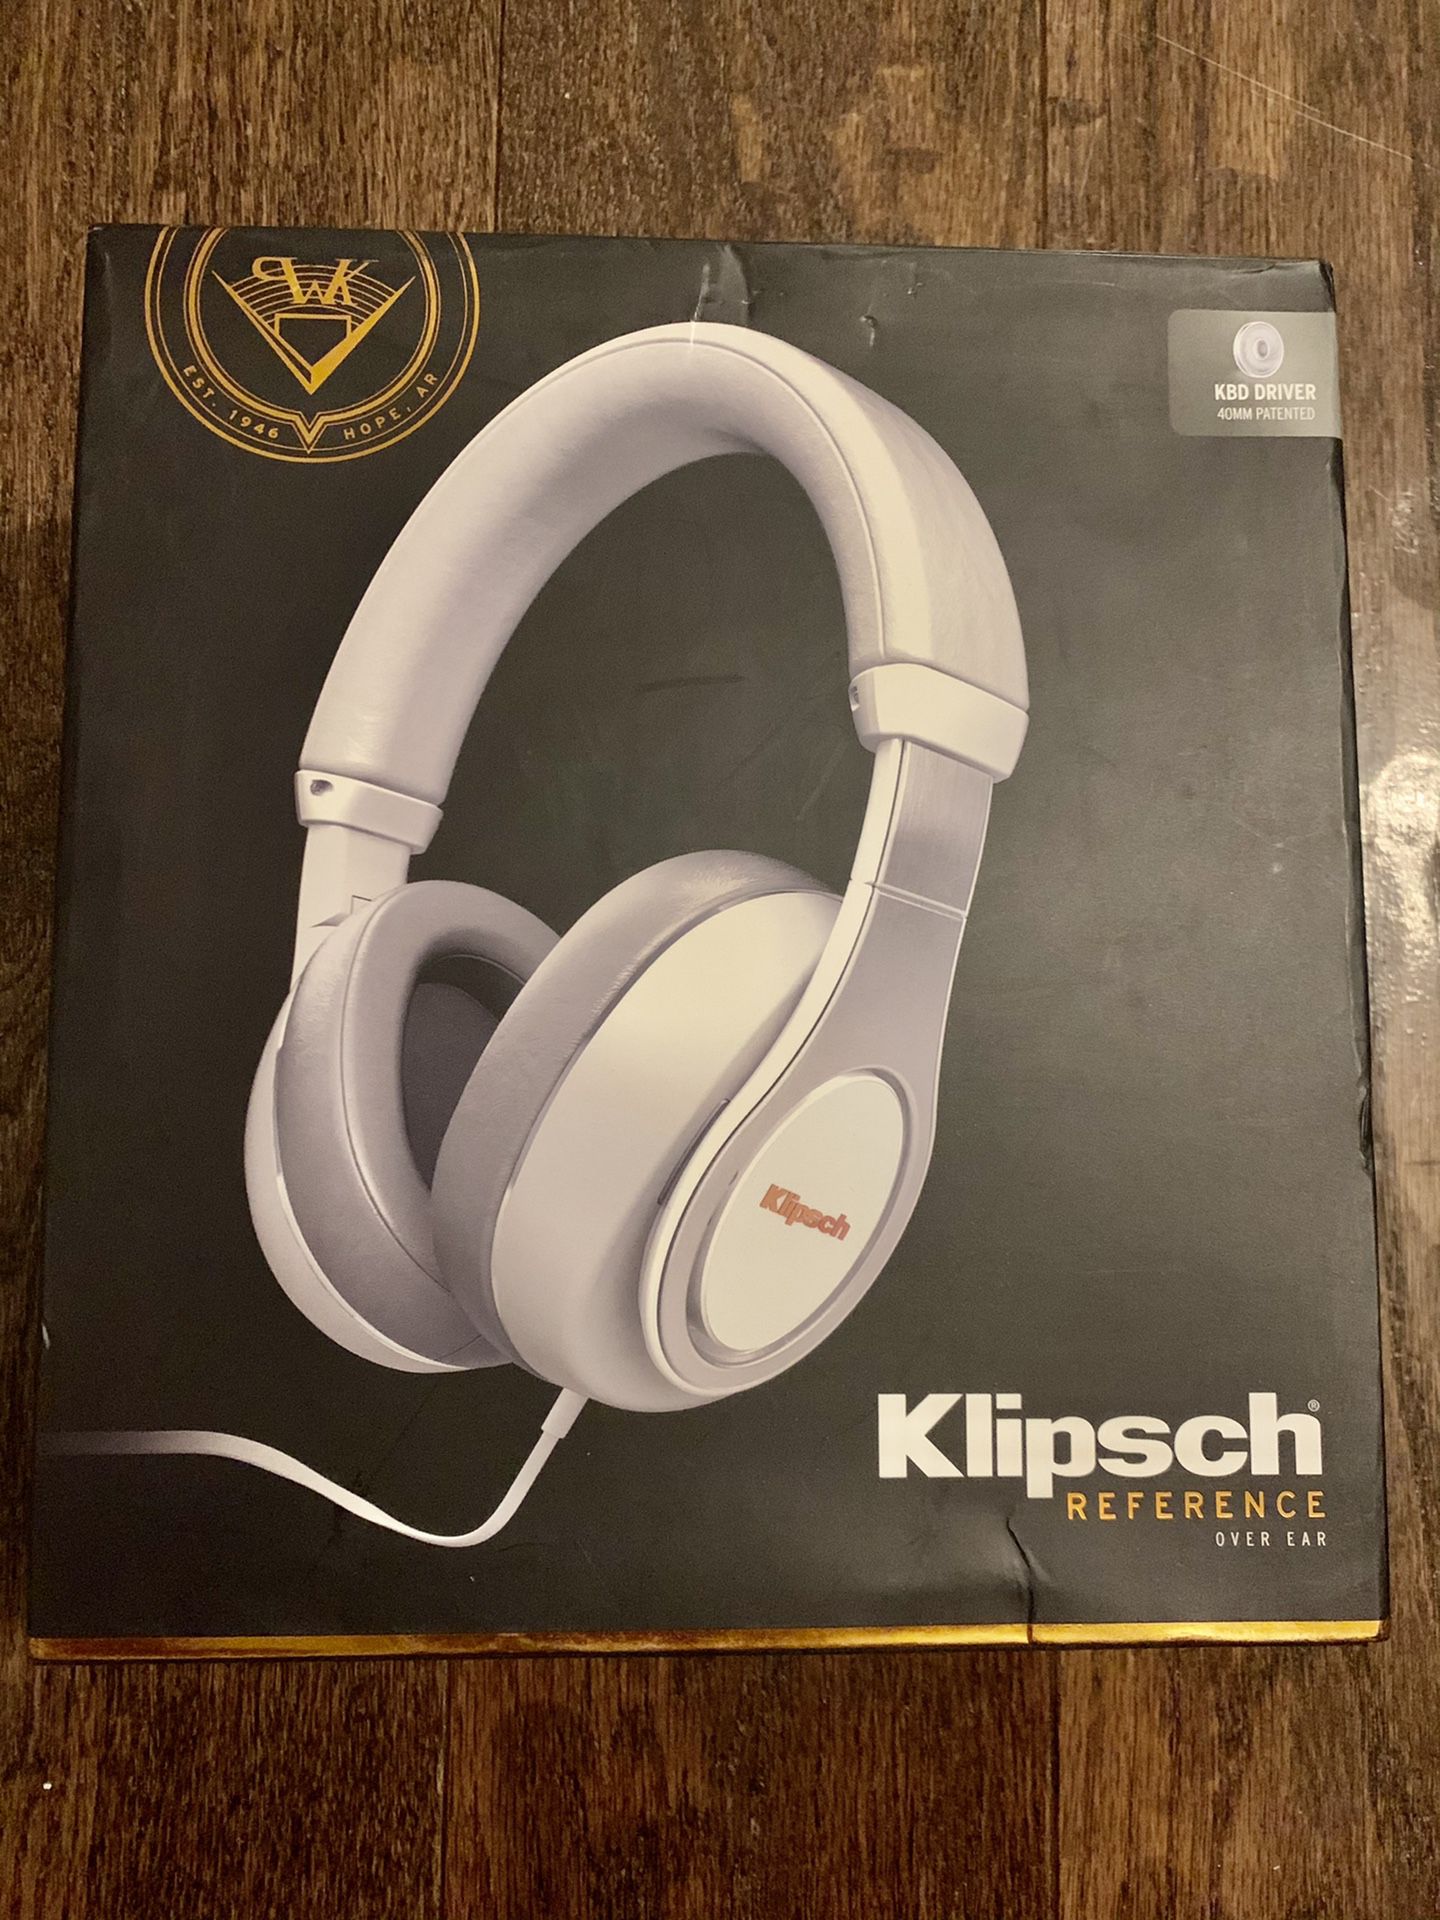 Klipsch Reference over ear wired headphones - new!